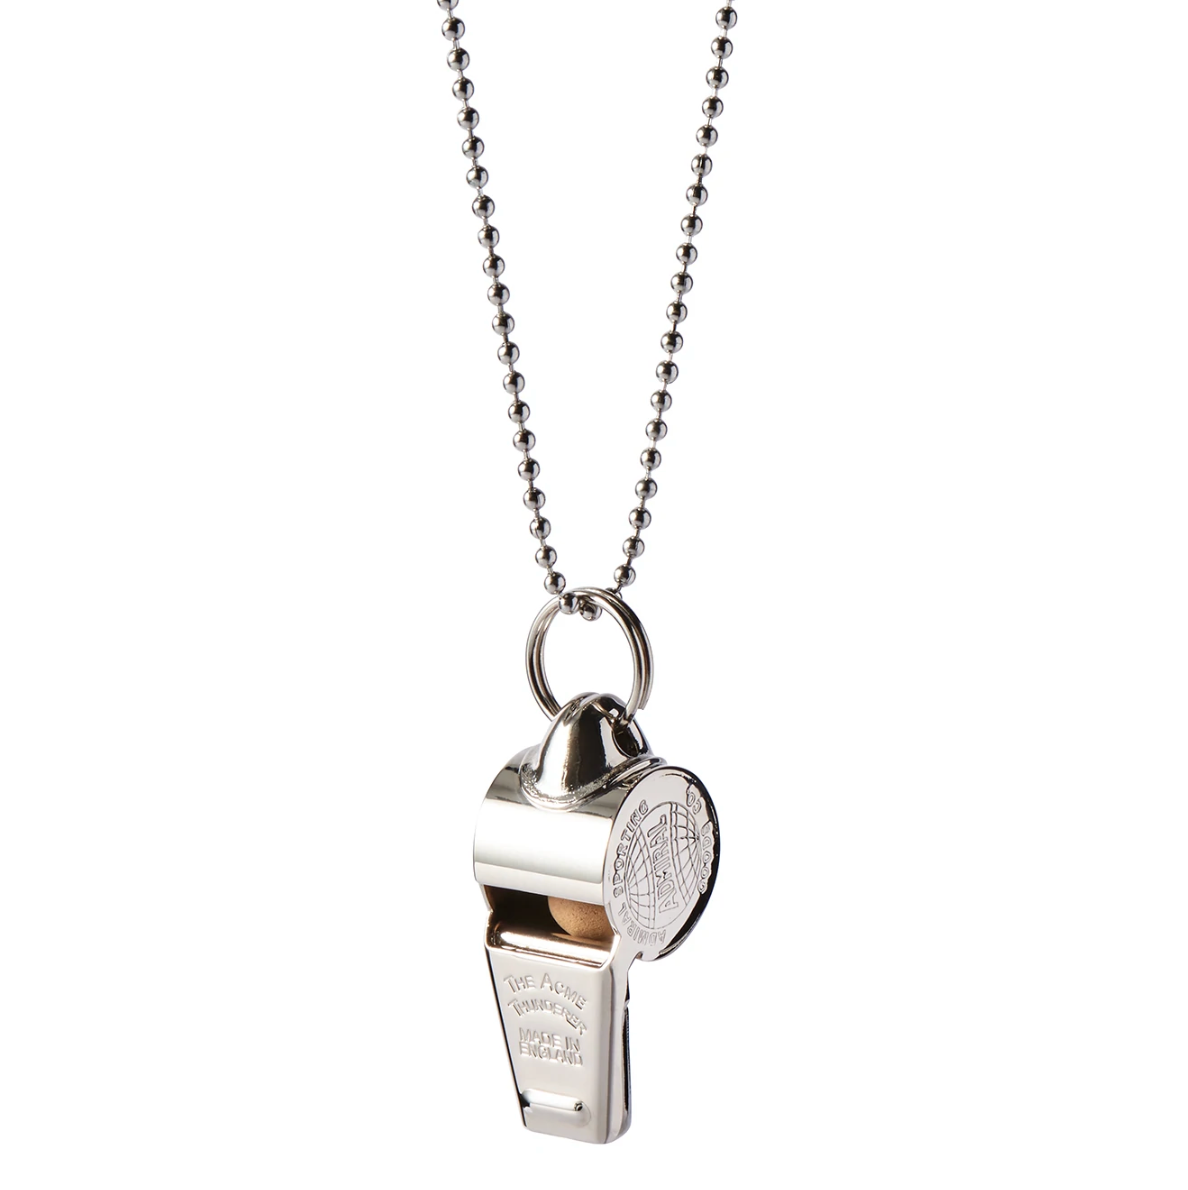 Acme x Admiral Goods Whistle Necklace Charm (No Chain included) - Silver , Necklaces, Admiral, Working Title